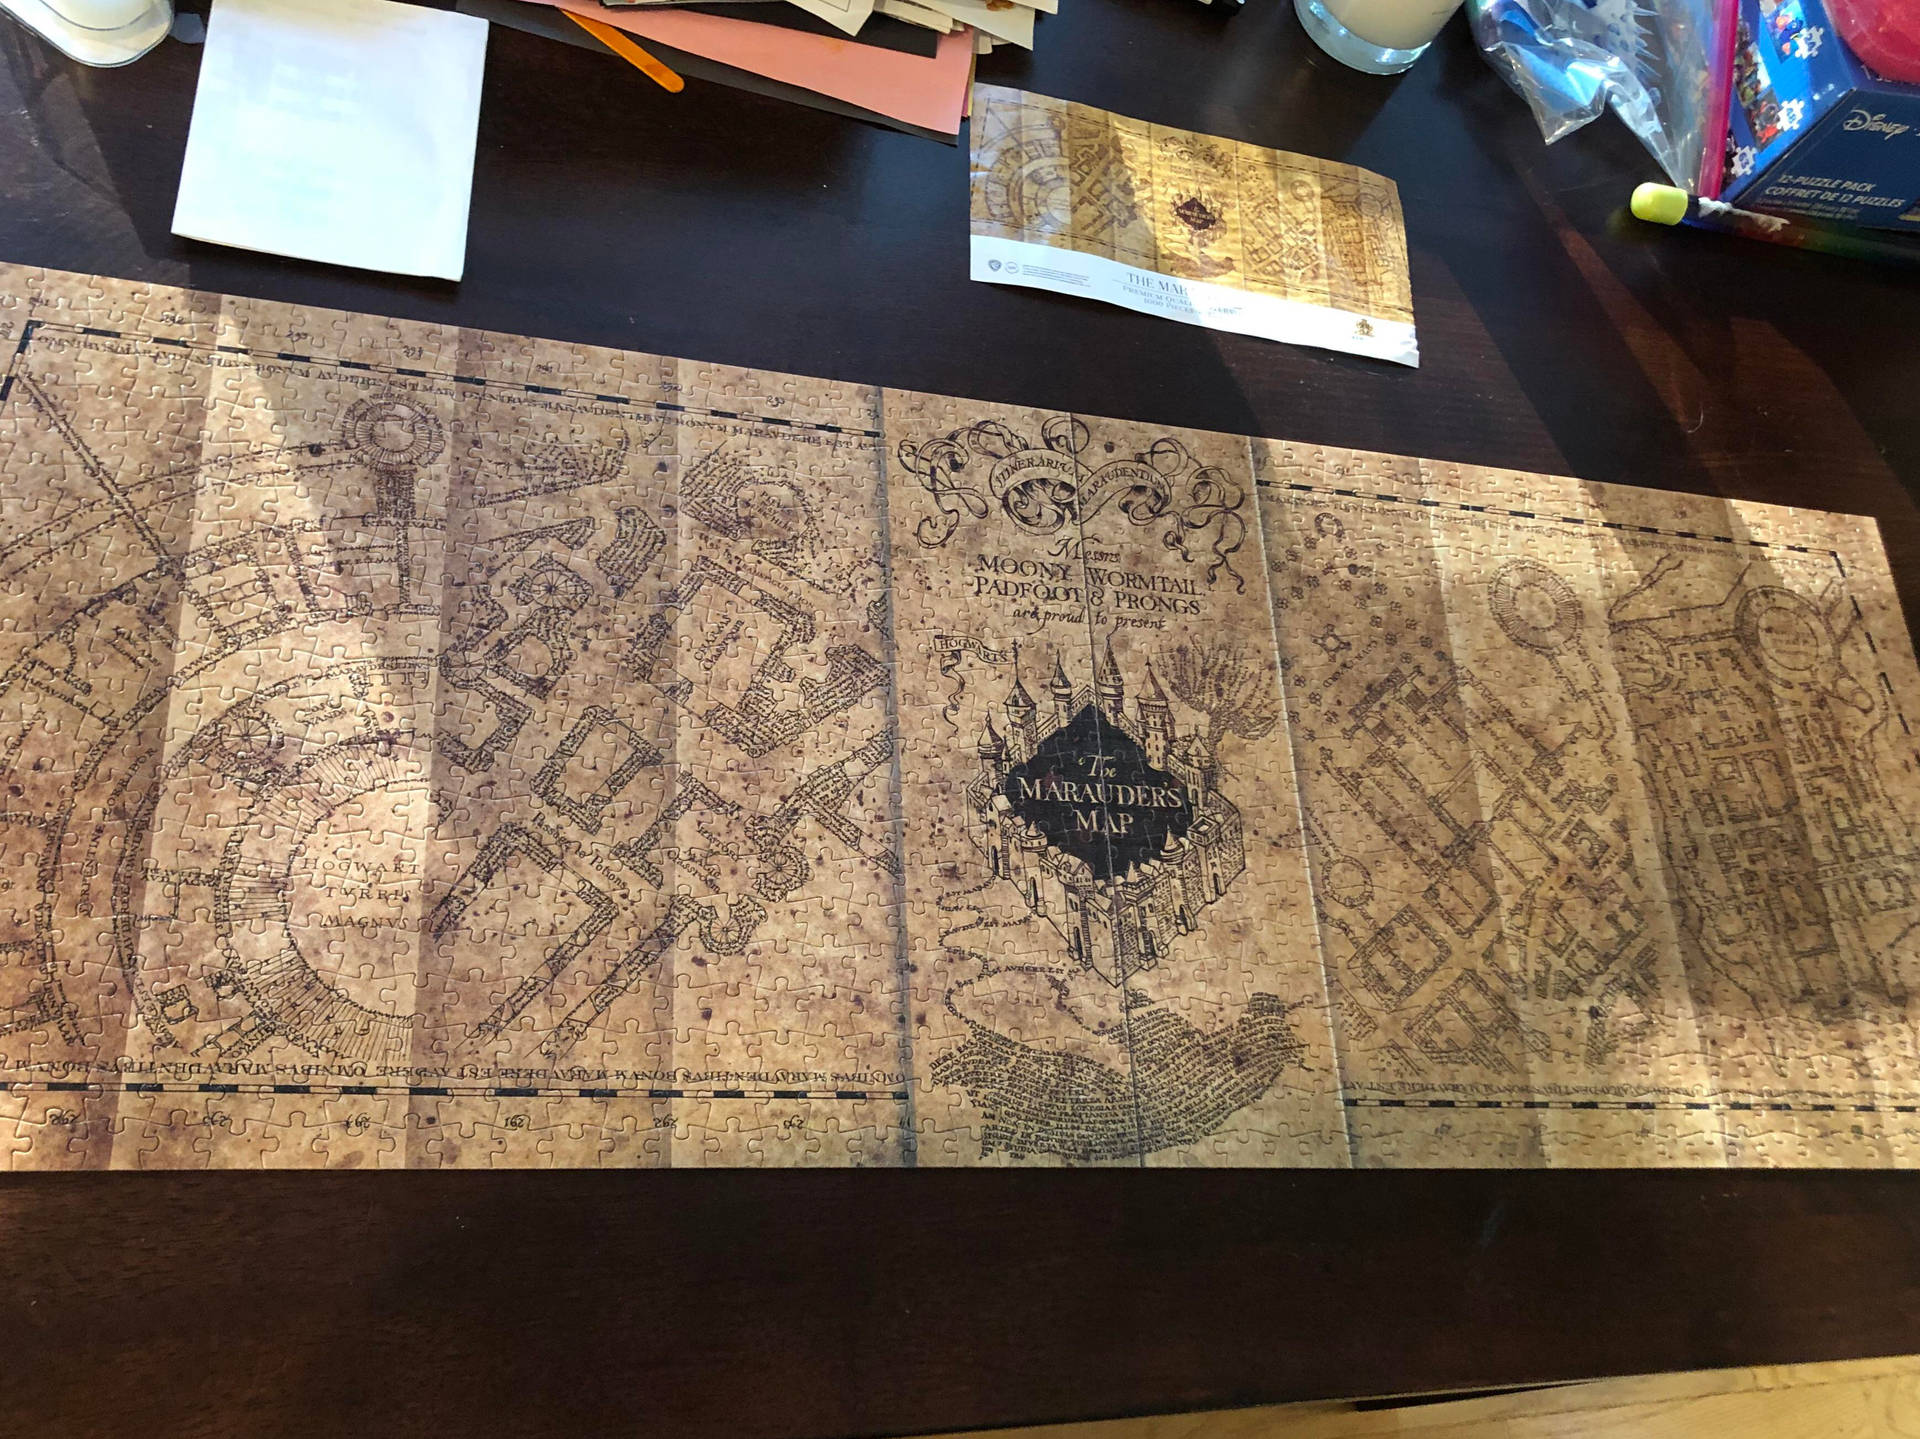 This marauders map (Harry Potter) jigsaw took half a year to